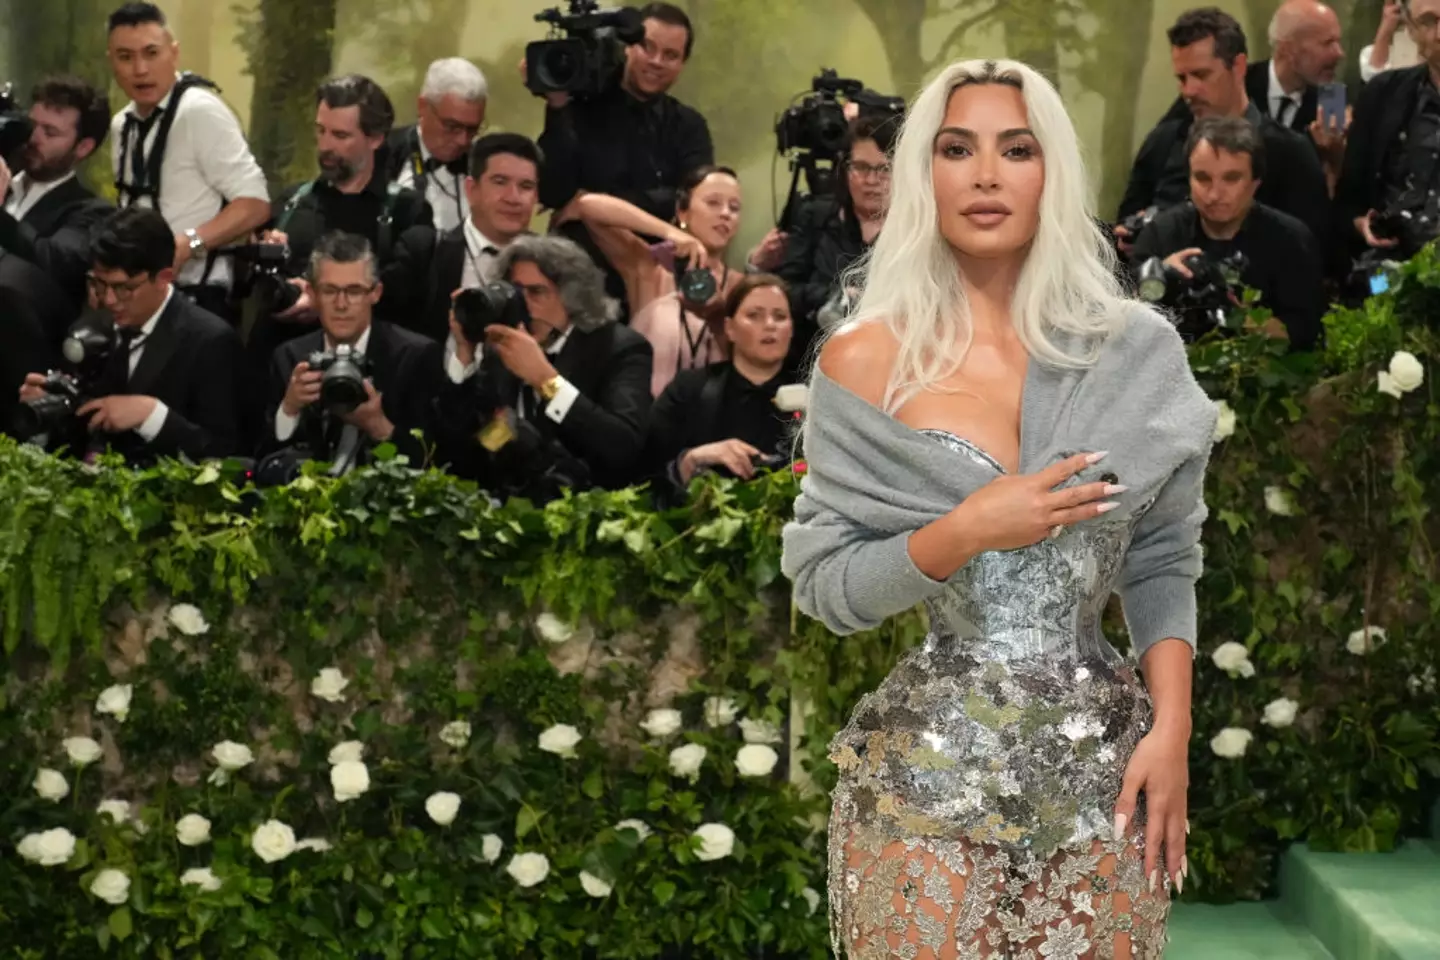 Kim Kardashian's outfit choice at this year's Met Gala hasn't gone down too well with fans. (Jeff Kravitz/FilmMagic)